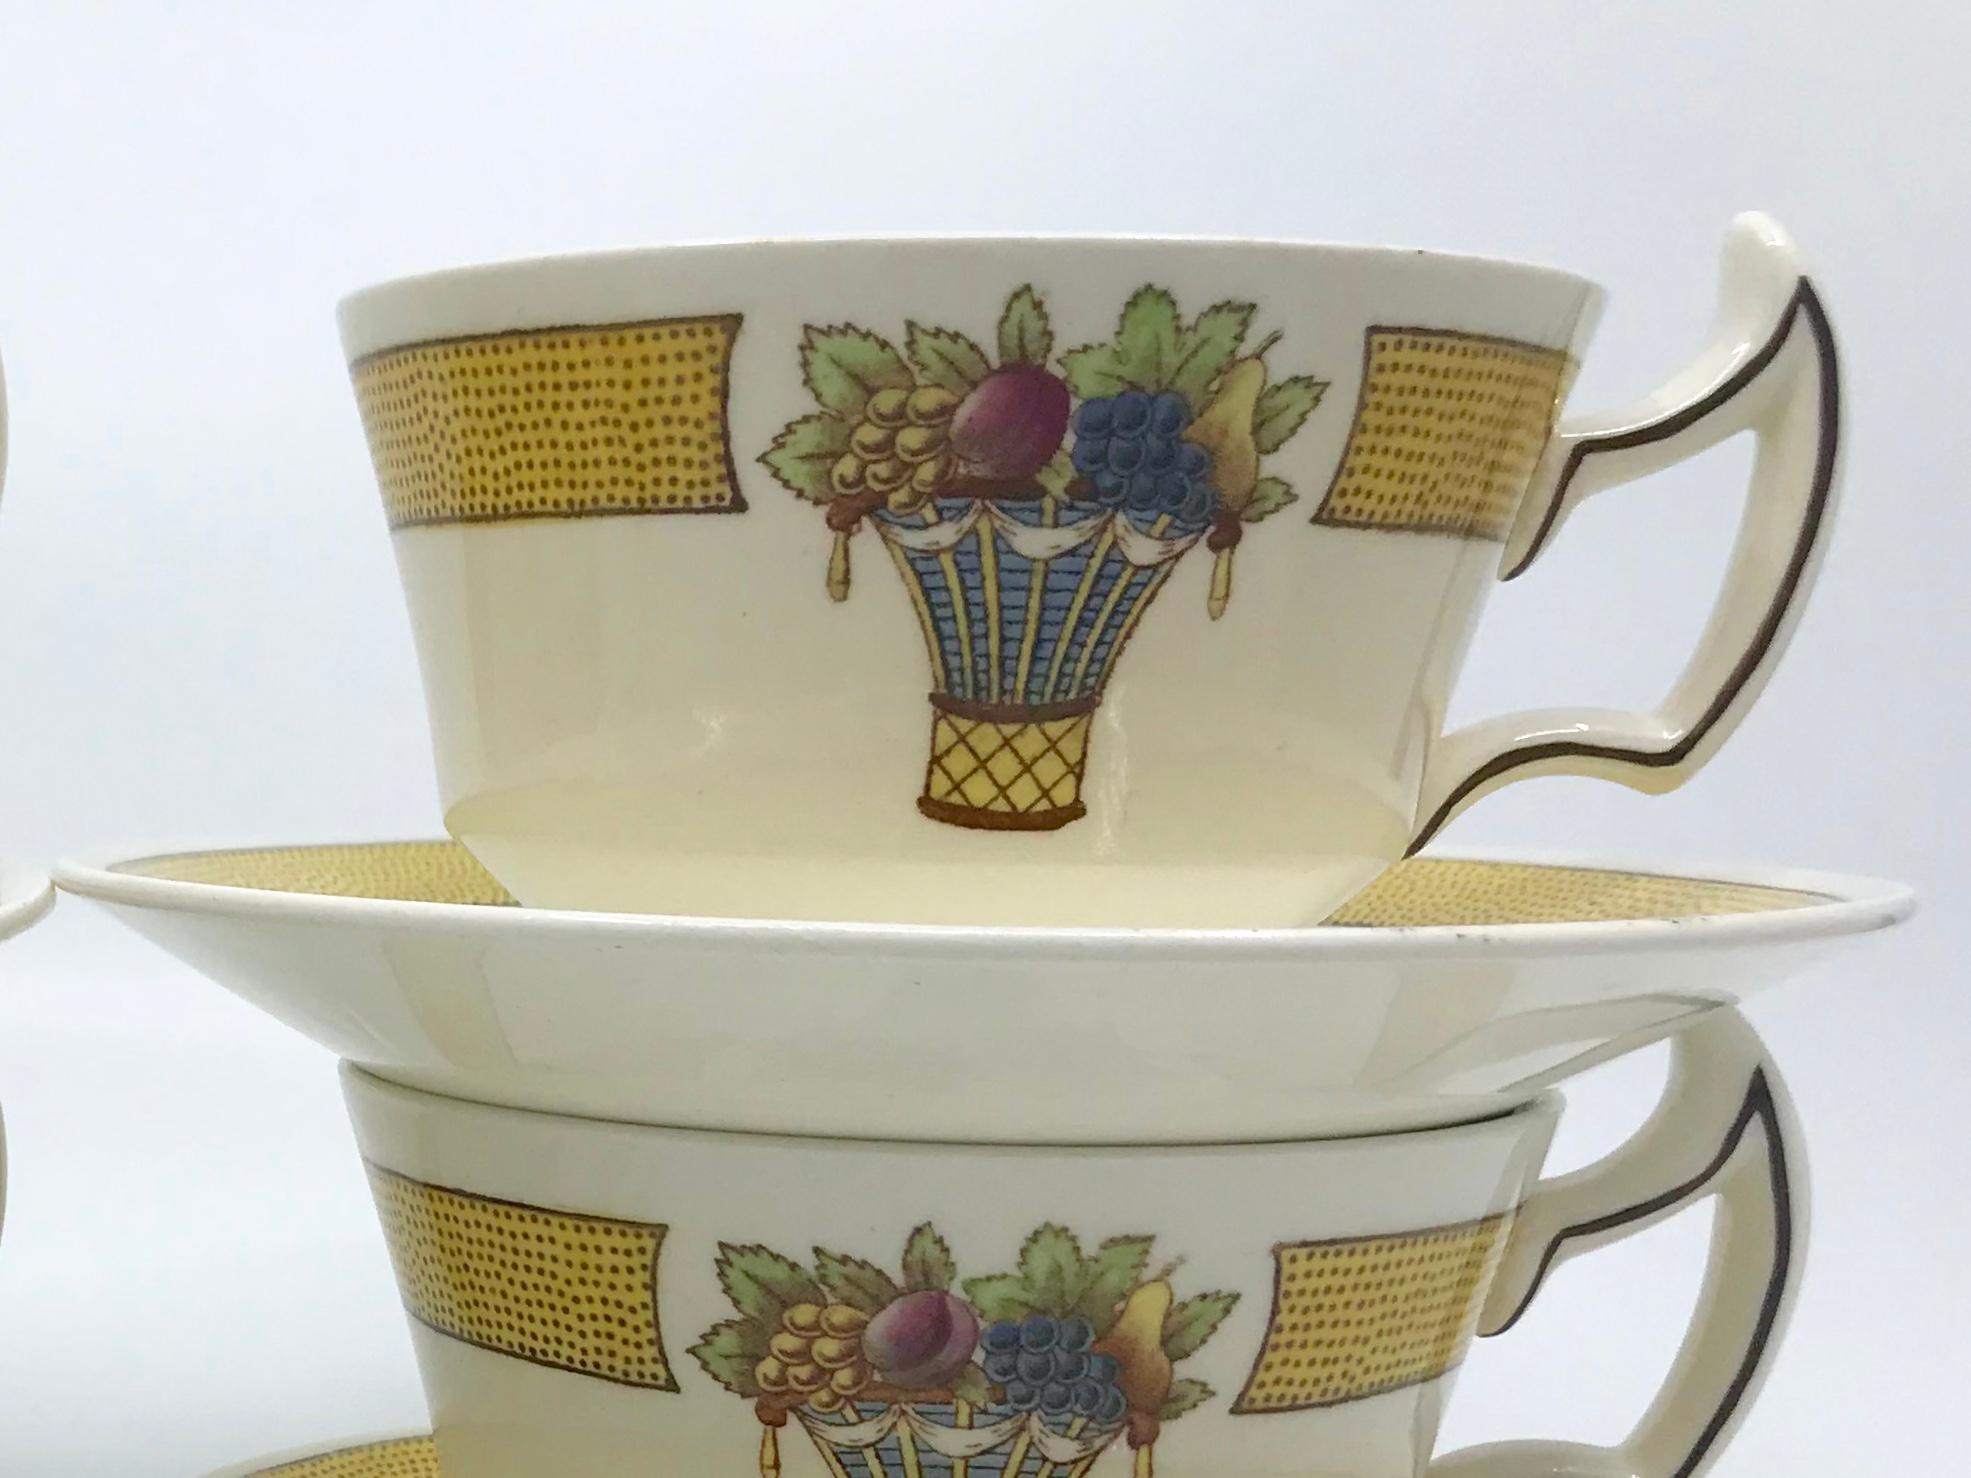 Set of four Wedgwood Directoire pattern yellow banded cream cups and saucers. Cups and saucers in the Directoire pattern and style with characteristic handles of the post Revolutionary six year period of the French Directory. England, circa